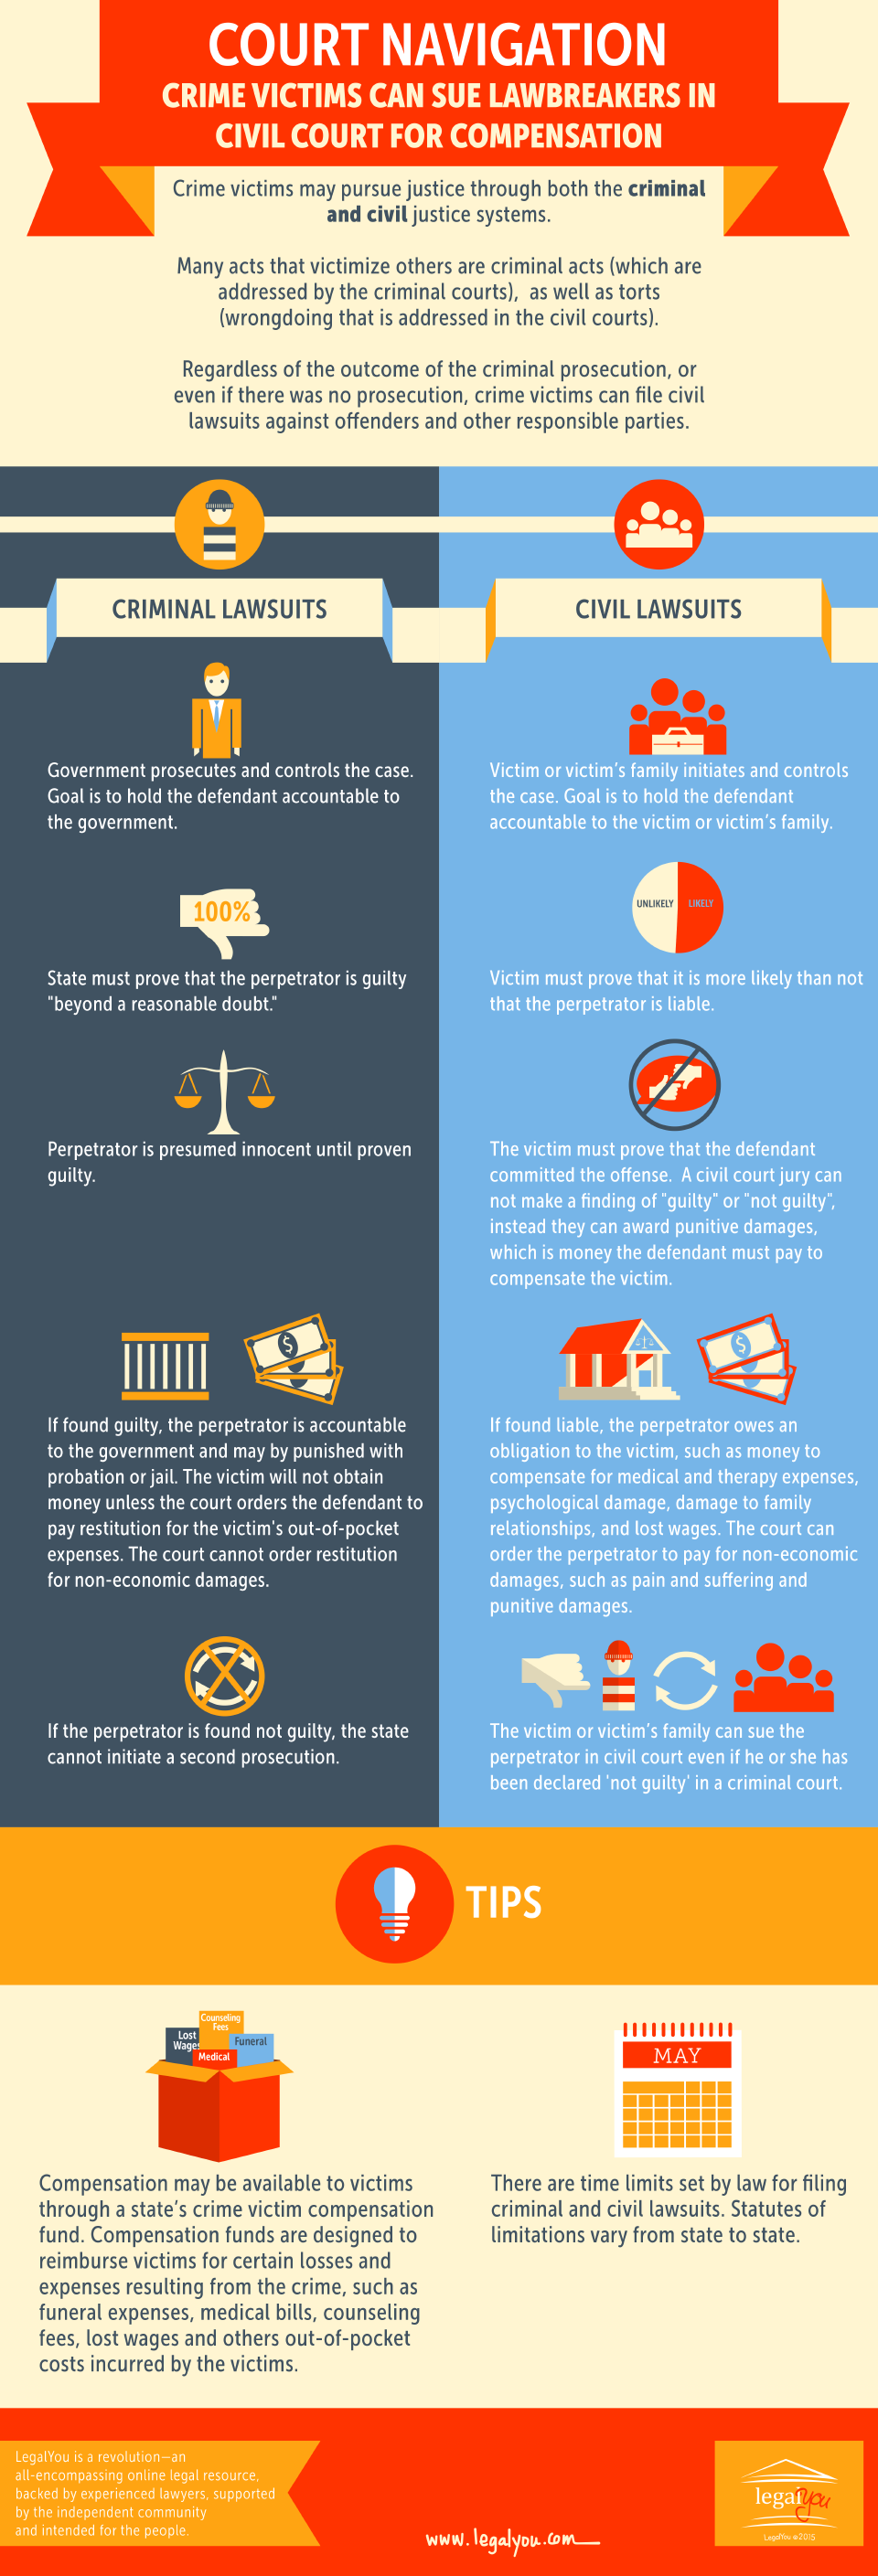 Crime Victims Can Sue in Civil Court (Infographic)